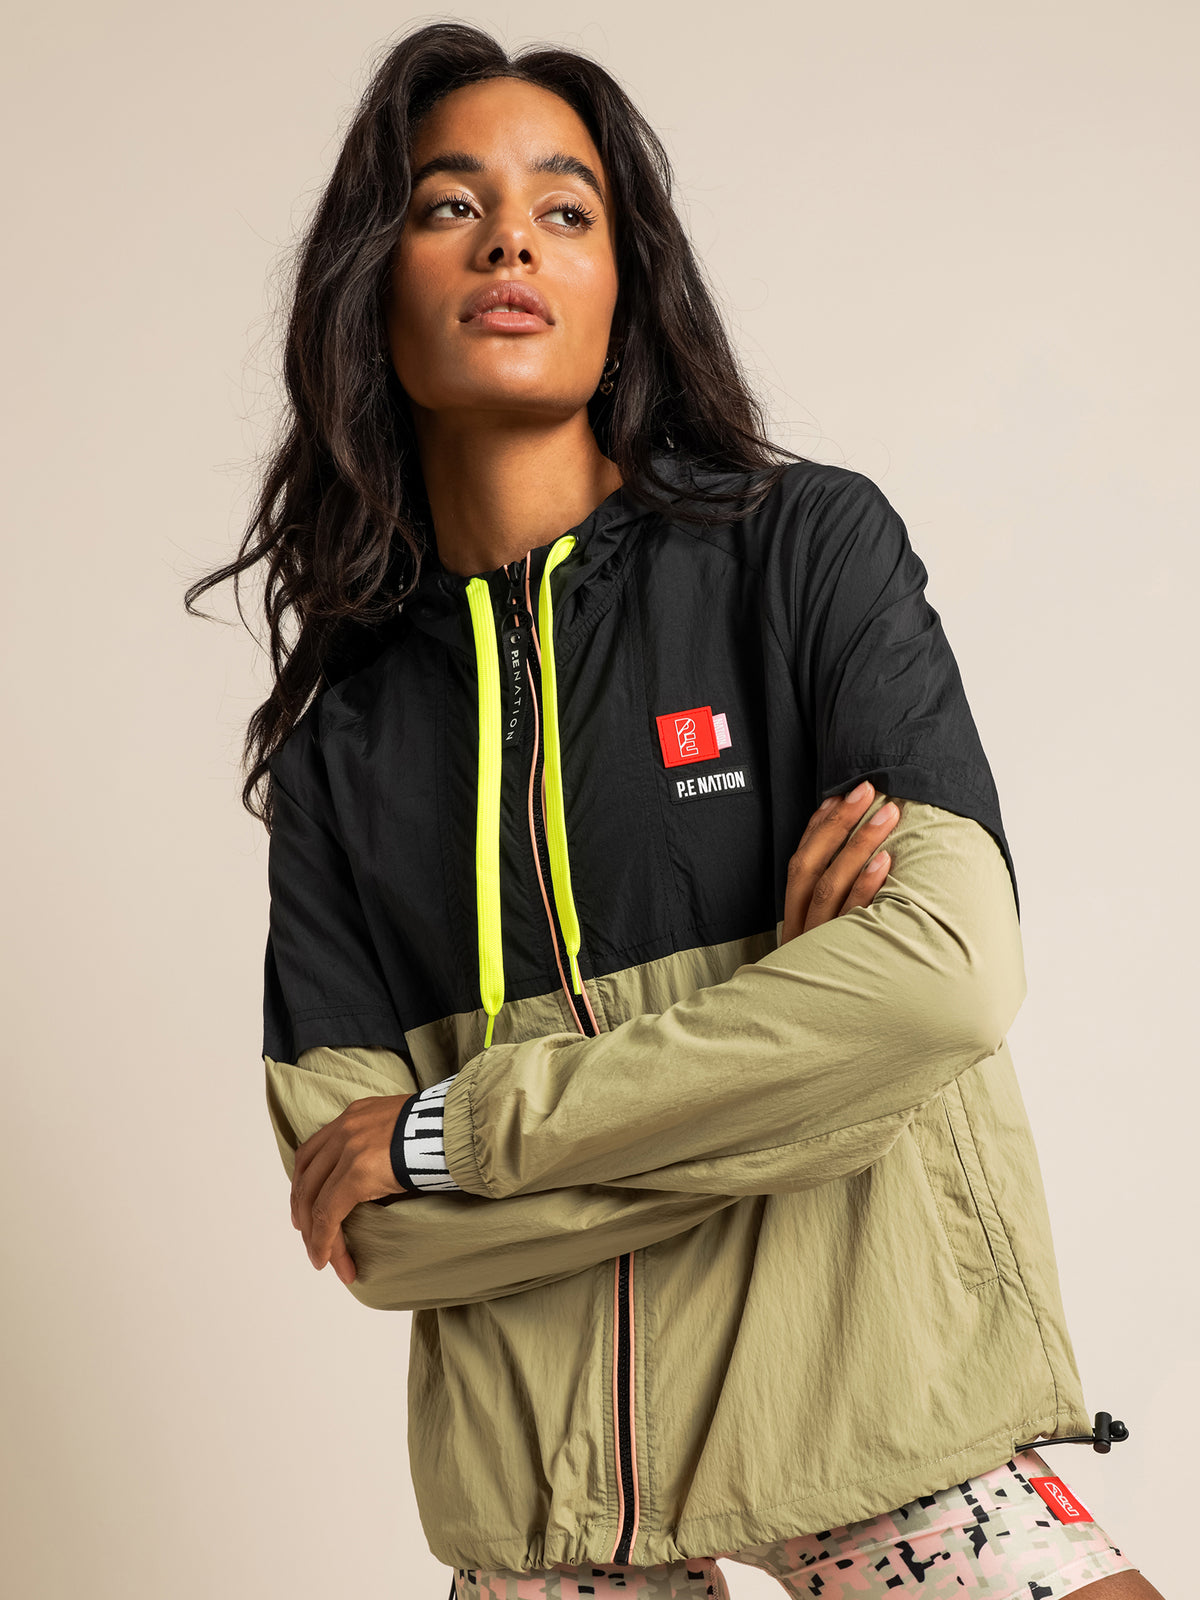 Propel Jacket in Olive Gray